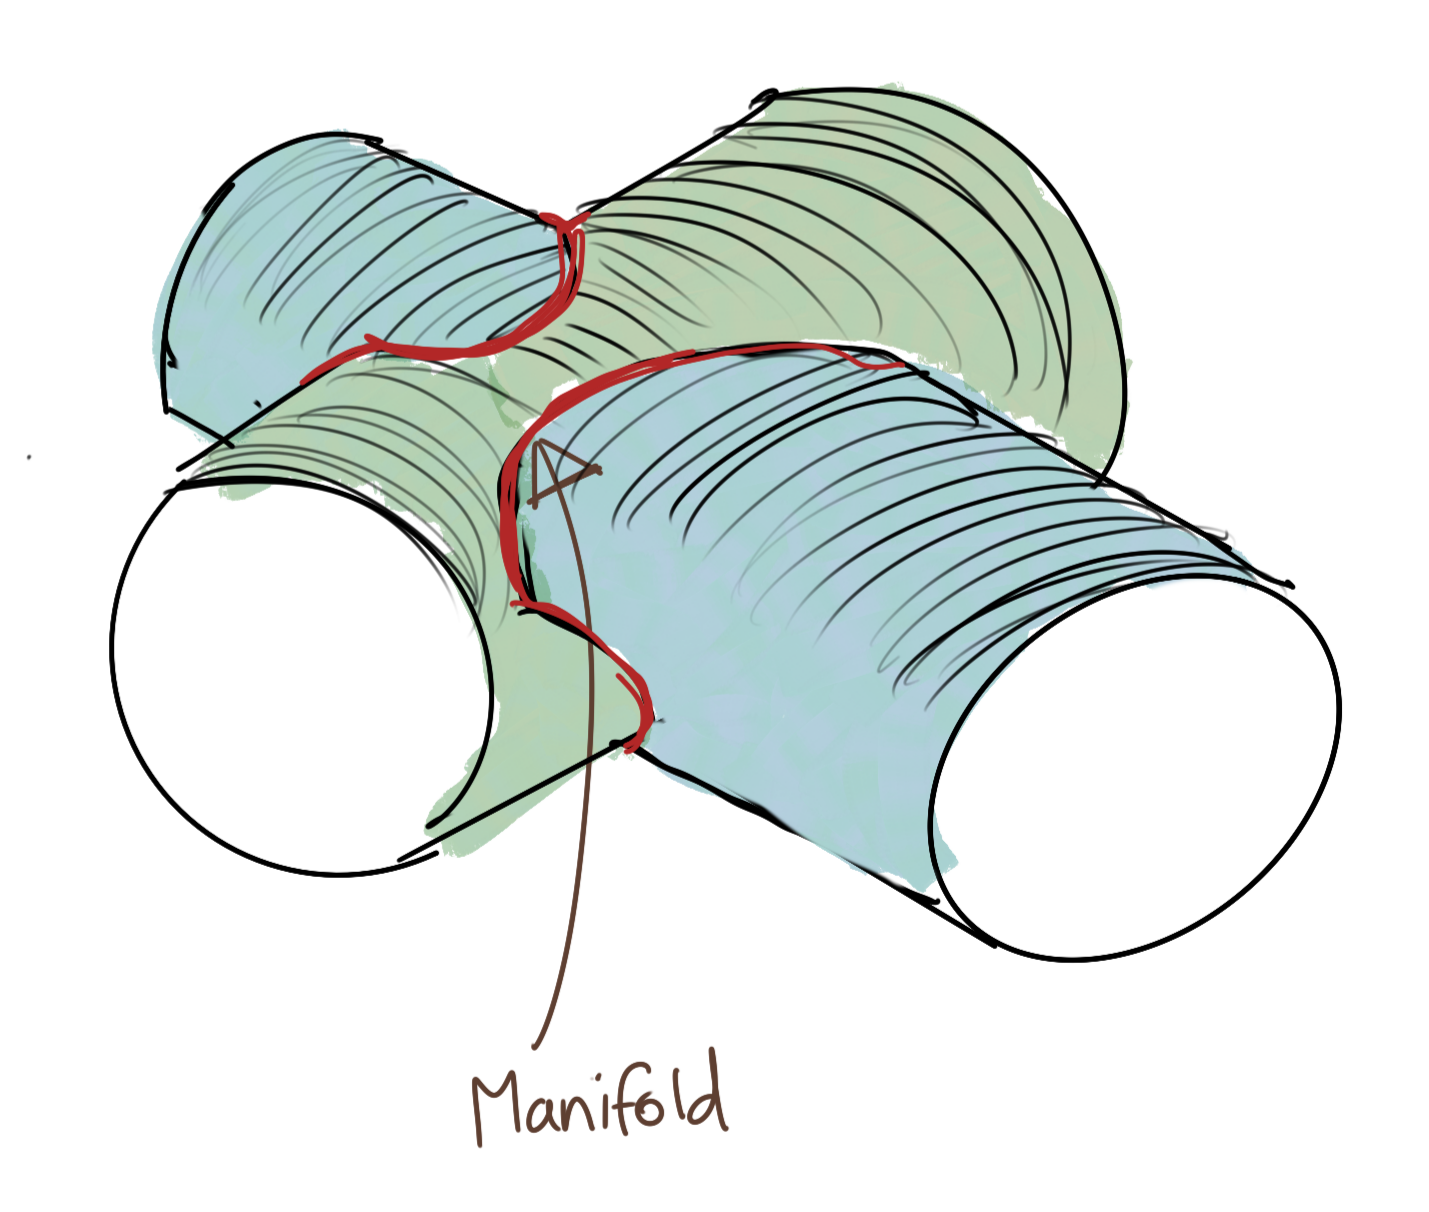 3D Manifold from Intersecting Cylinders